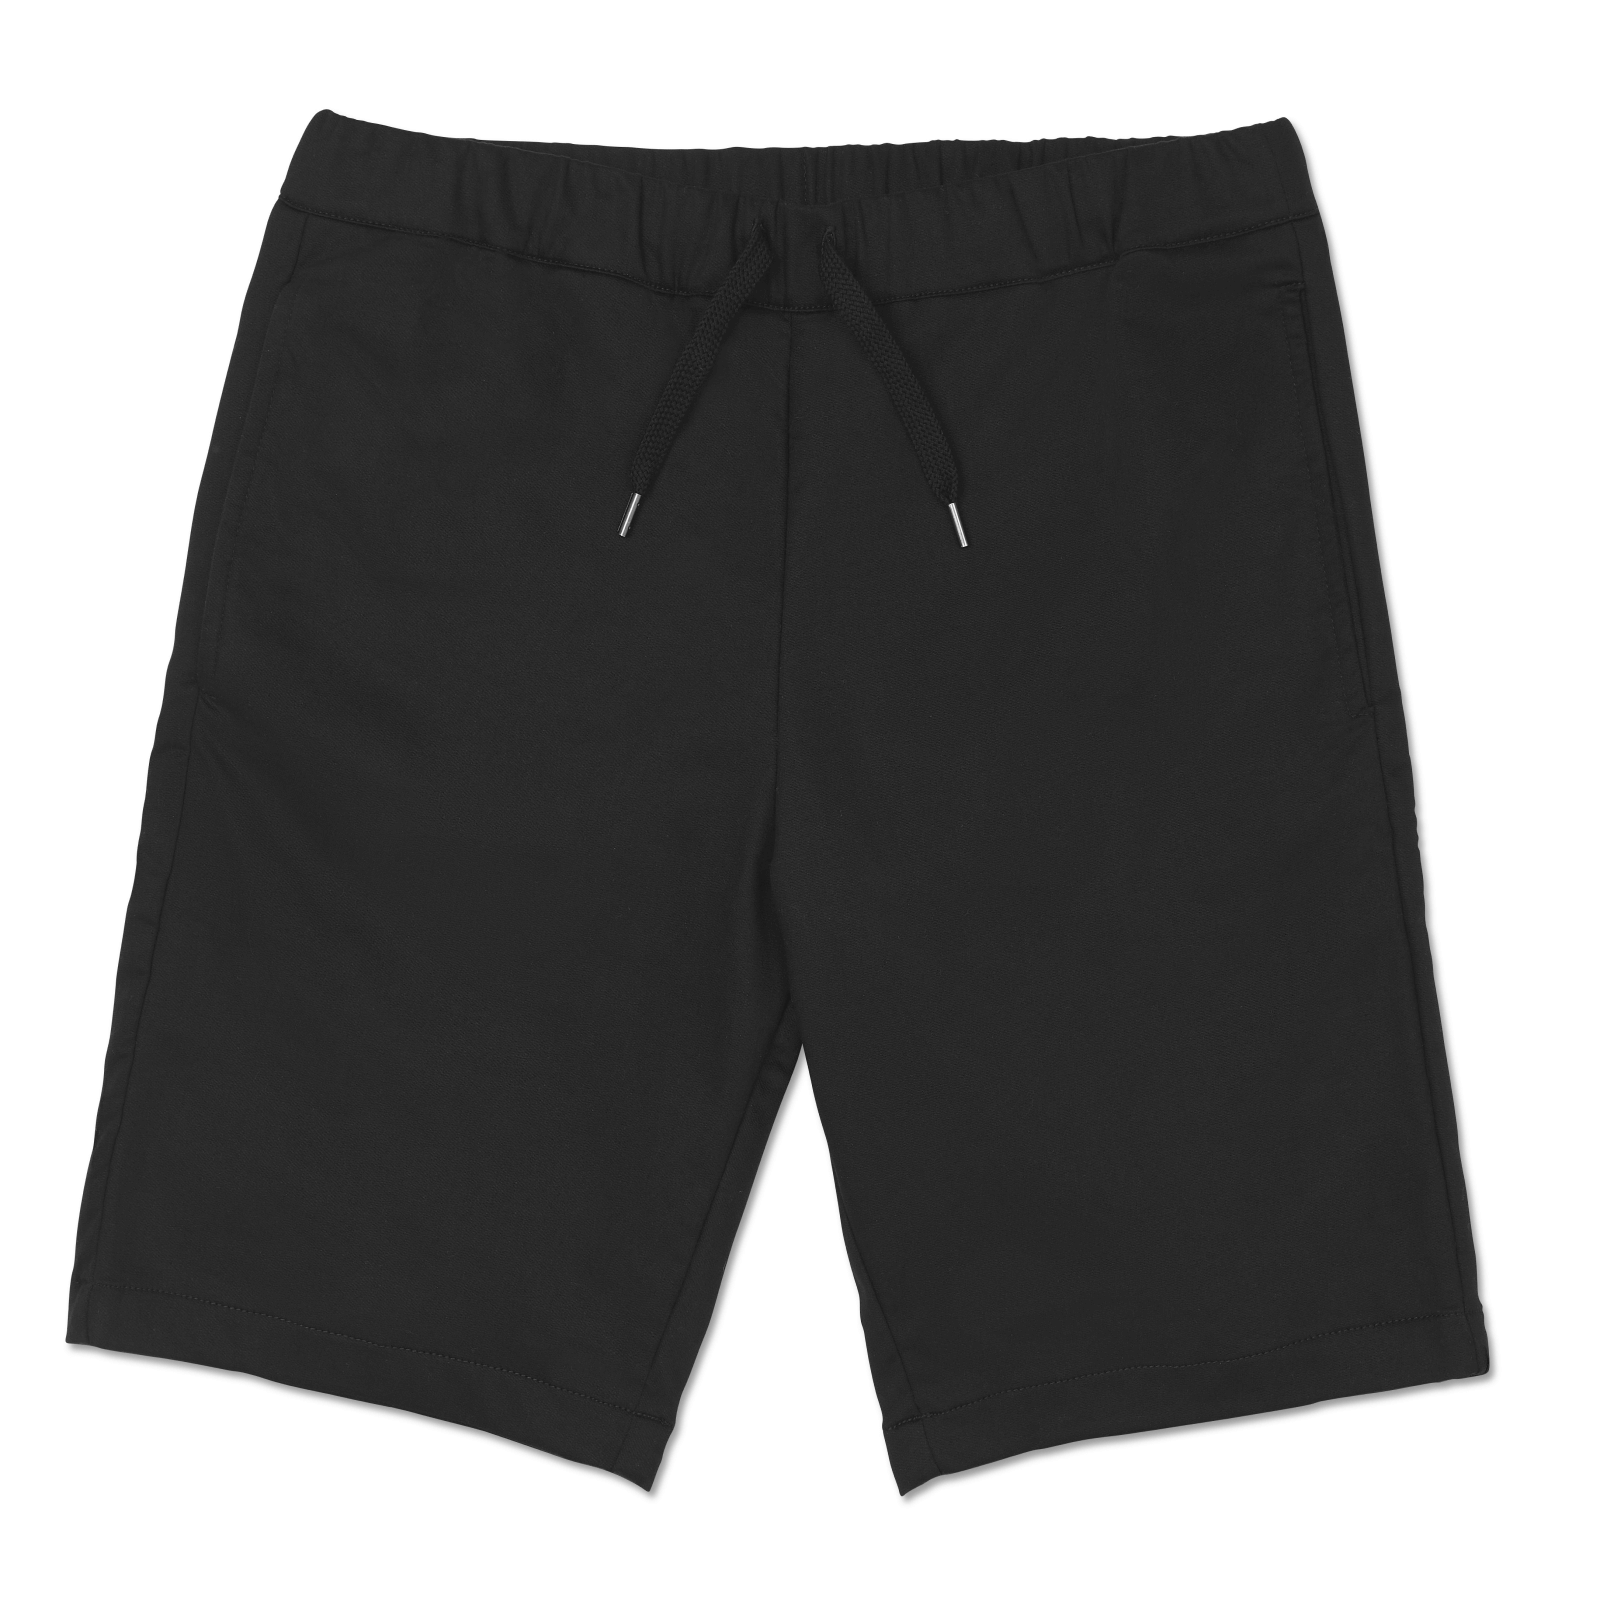 Products - Shorts